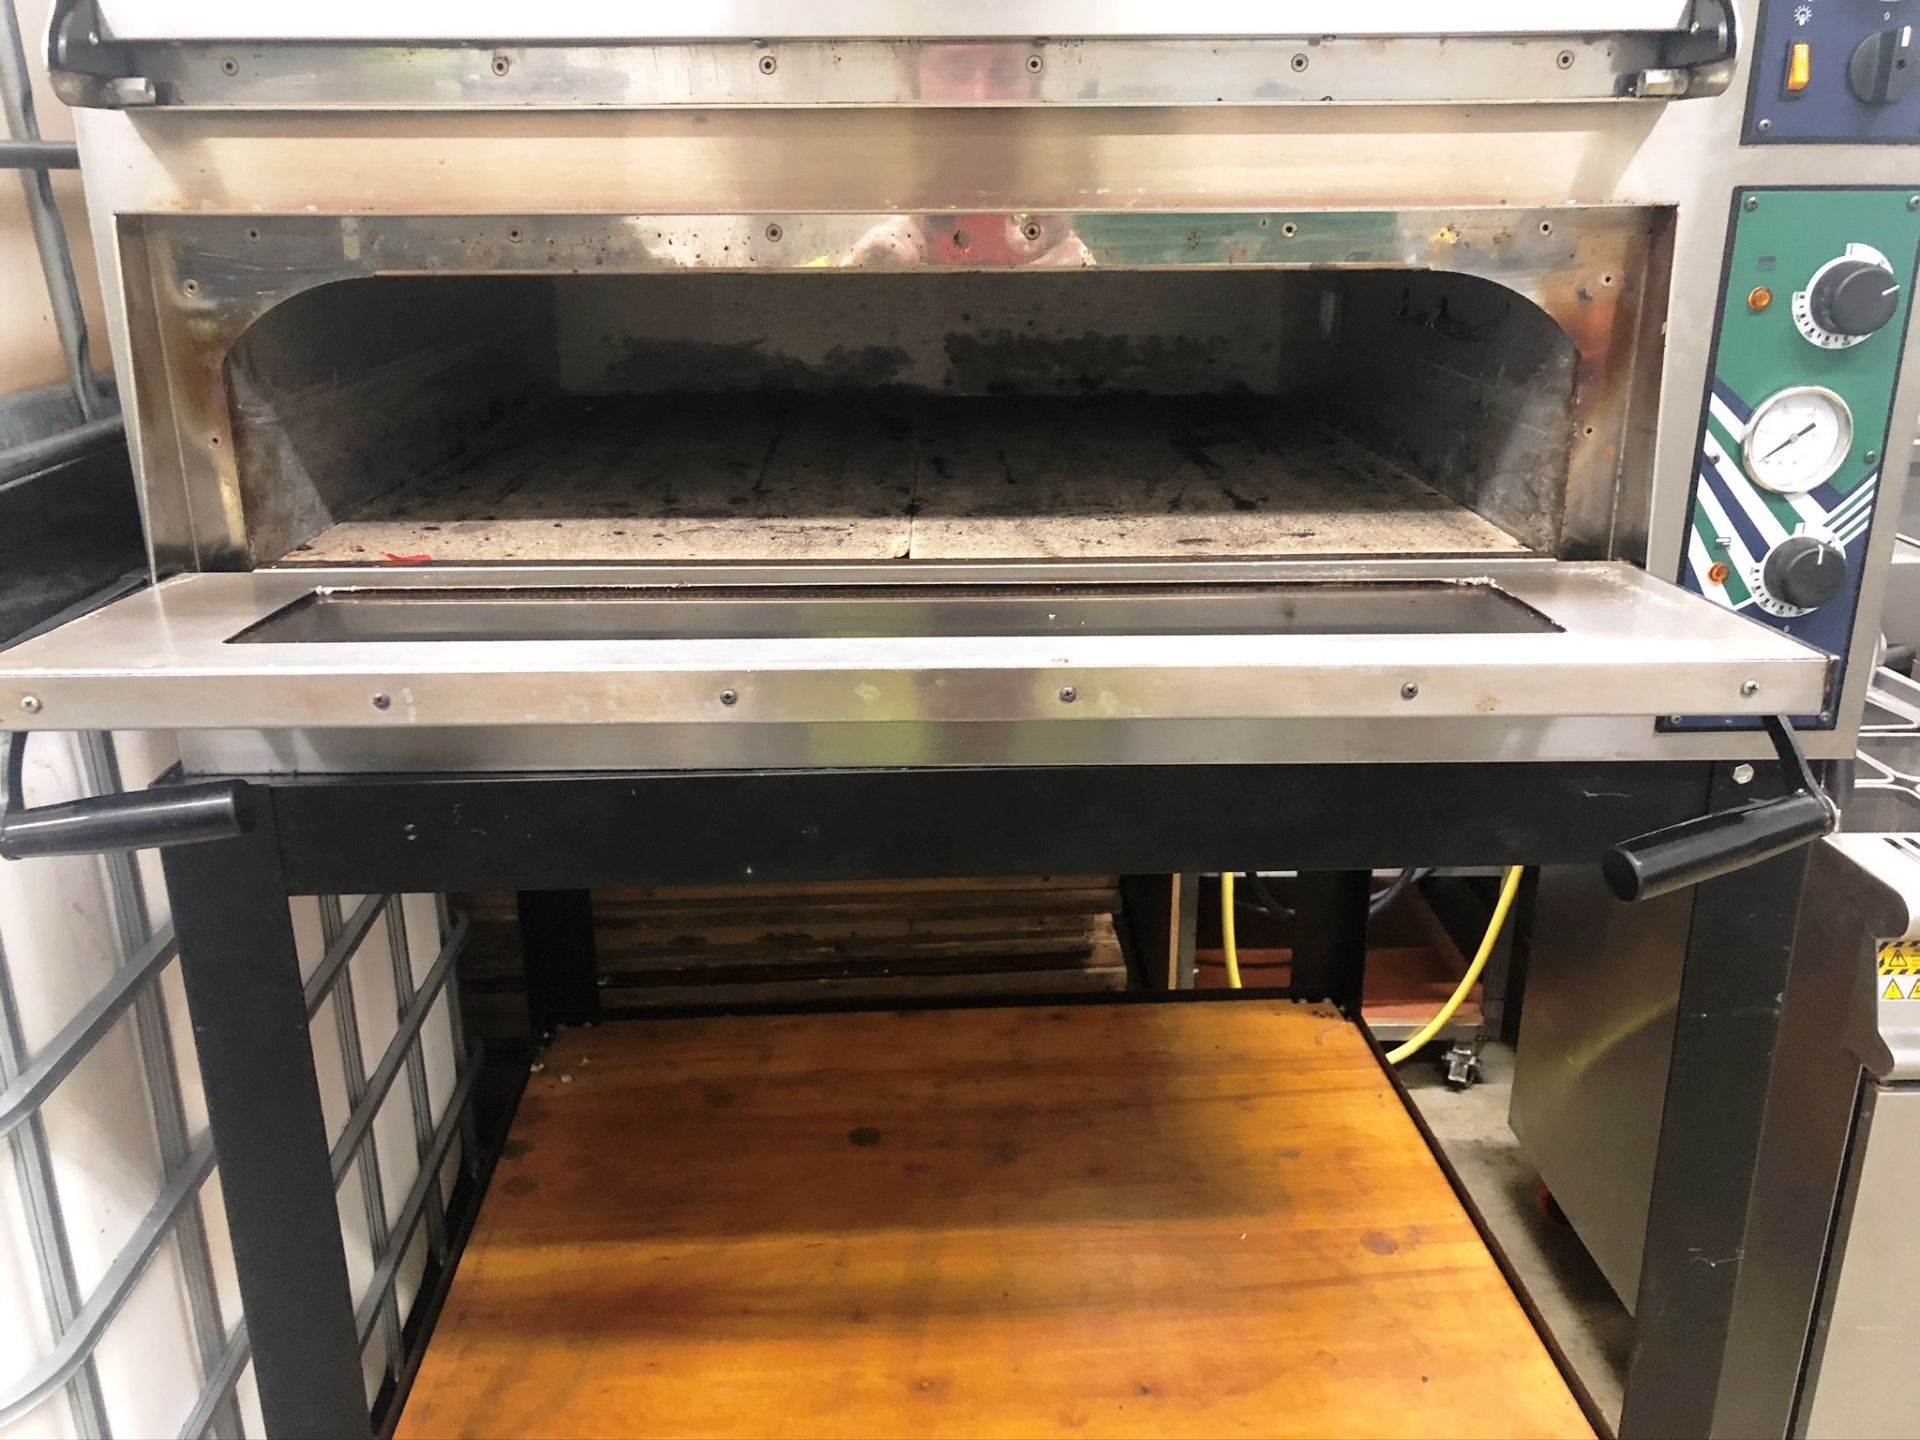 Hostek Trays44 New Glass Twin Deck Pizza Oven on Mobile Stand | 400v | YOM: 2017 - Image 4 of 6